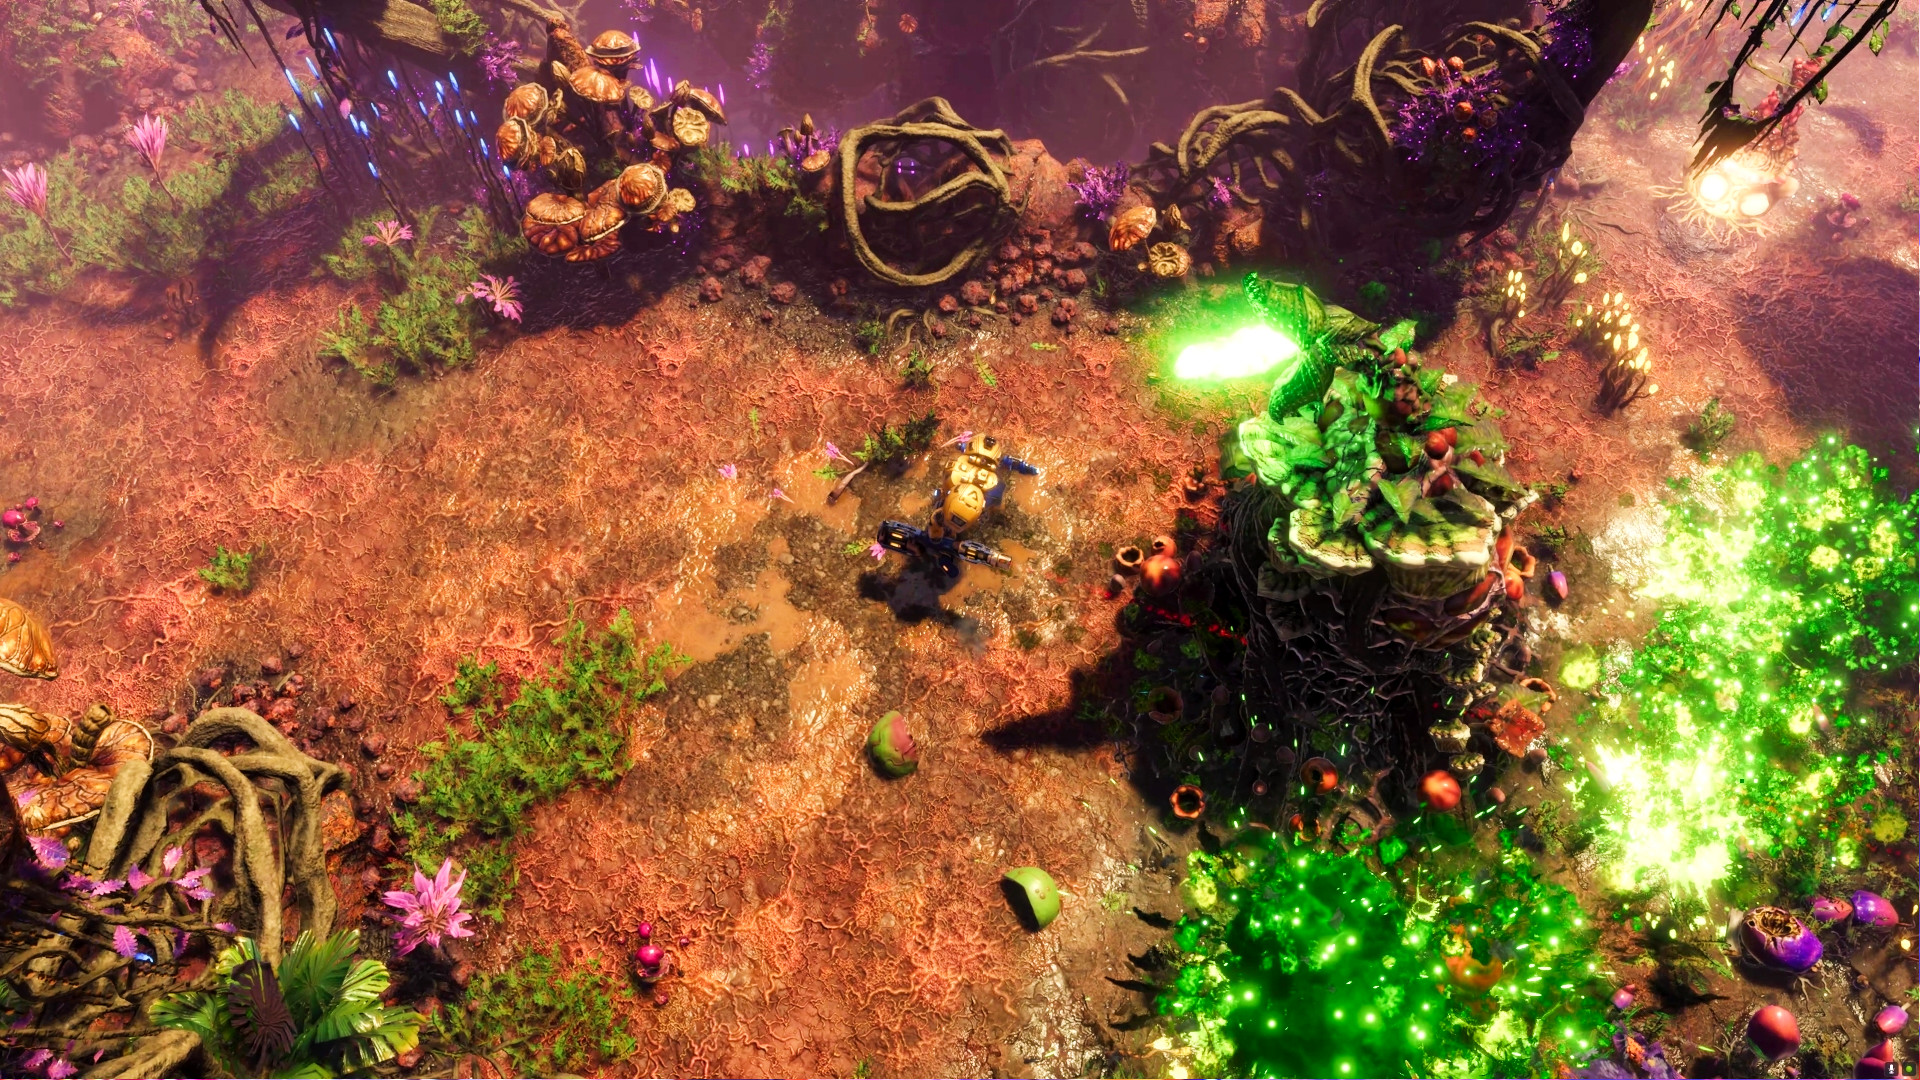 The Riftbreaker Heart of the Swarm DLC - A mech approaches a giant fungal growth spewing out green gunk.